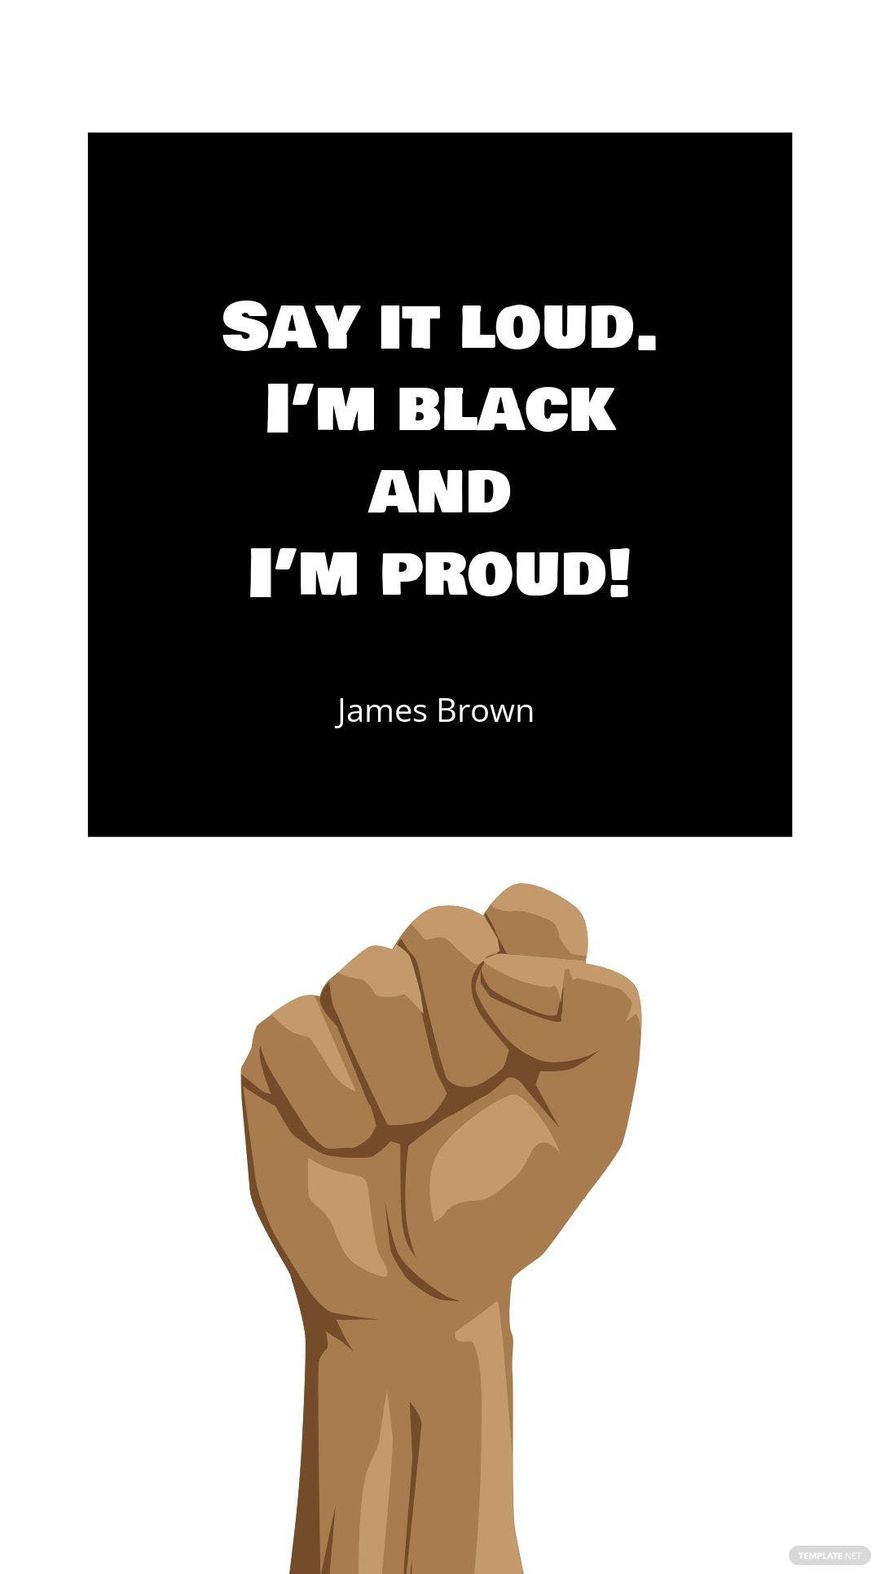 James Brown - Say it loud. I’m black and I’m proud!